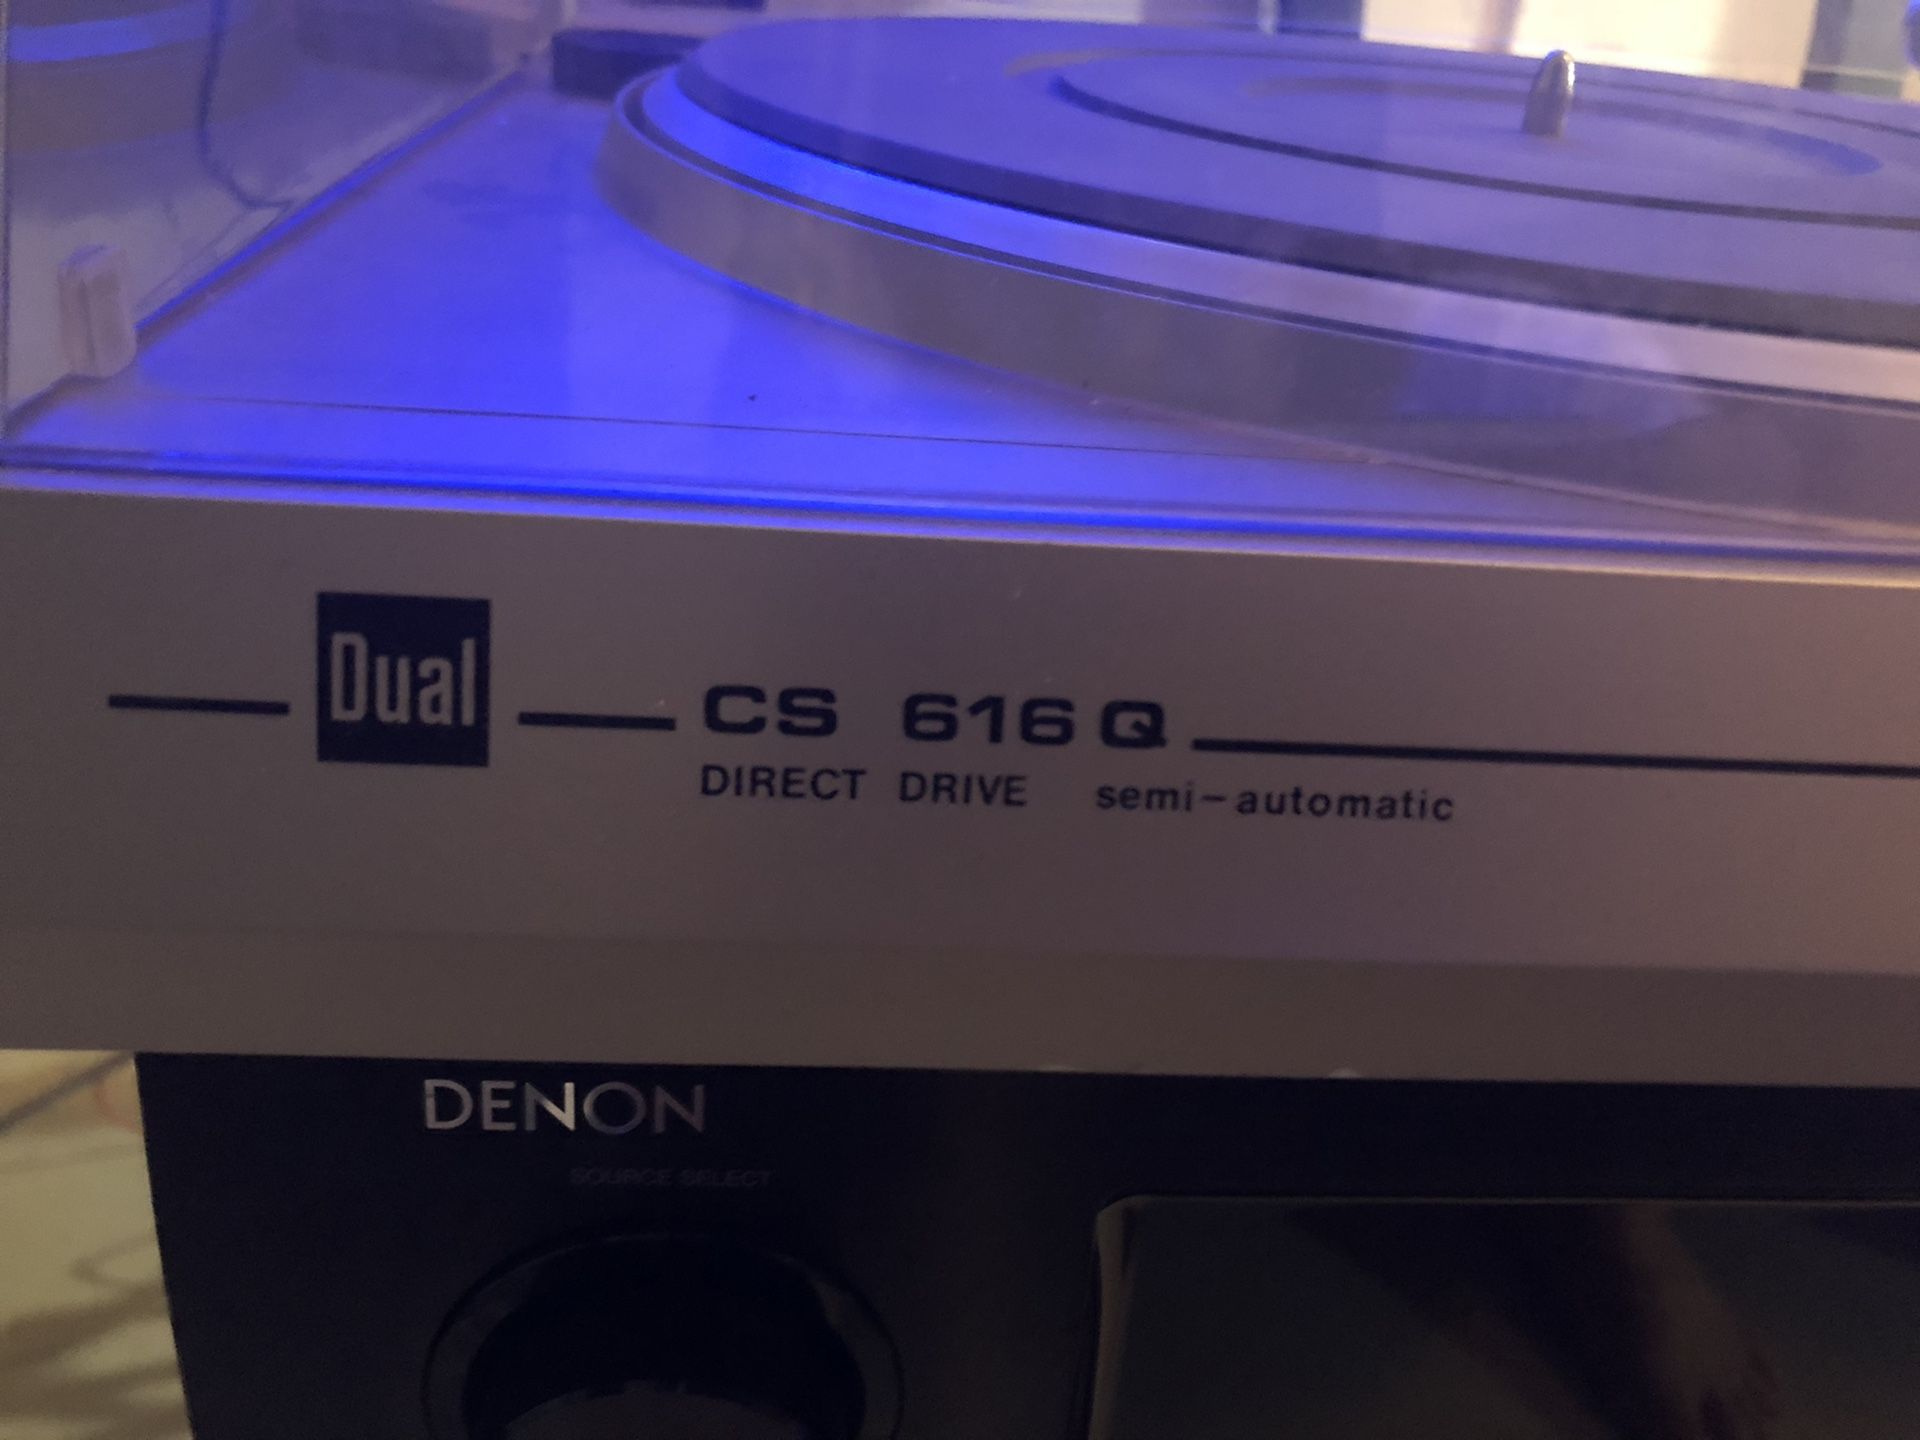 DUAL CS 616Q Vinyl turntable excellent condition fully functional